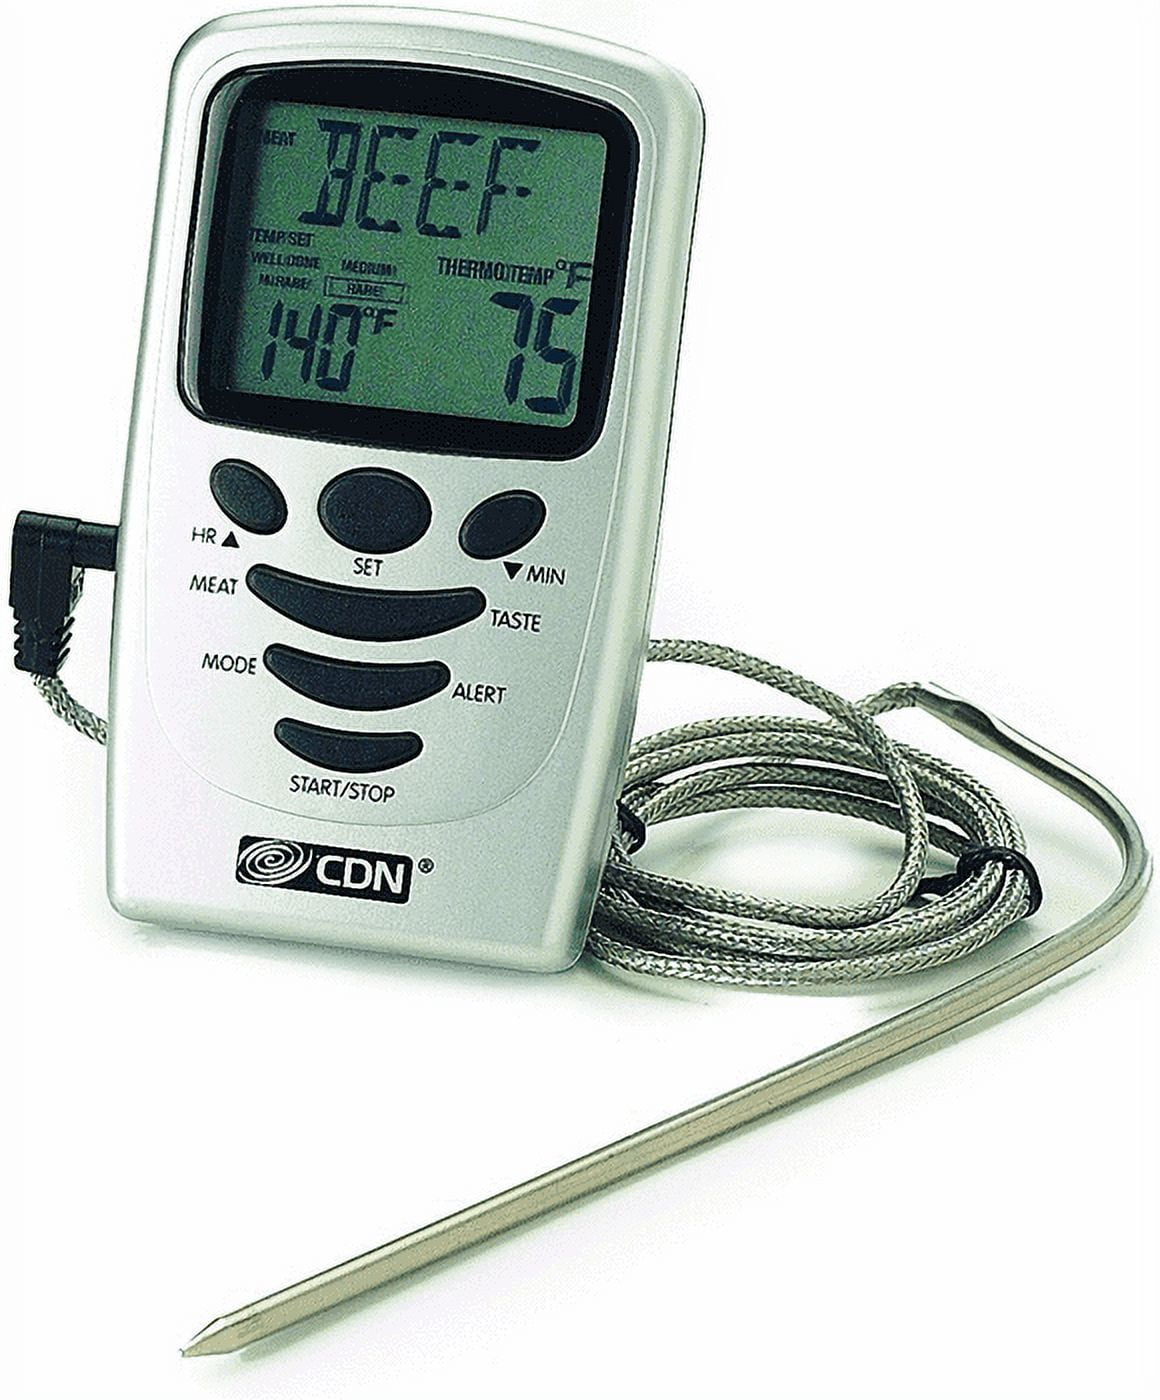 CDN DTP392 5 1/2 Digital Cooking Probe Thermometer with 36 Cord